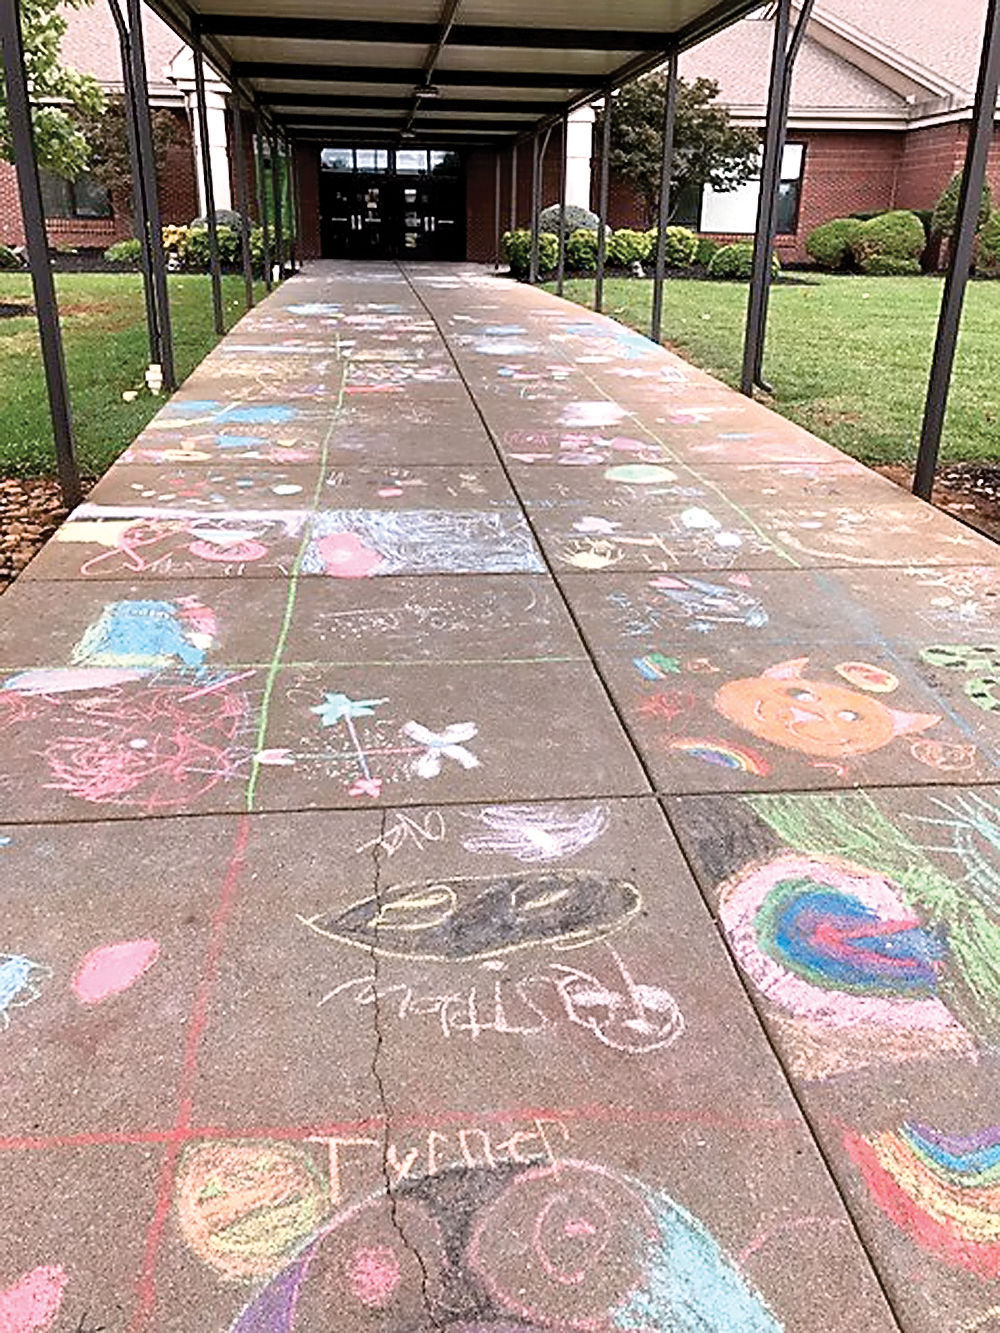 Foothills Elementary School students making their mark in many ways